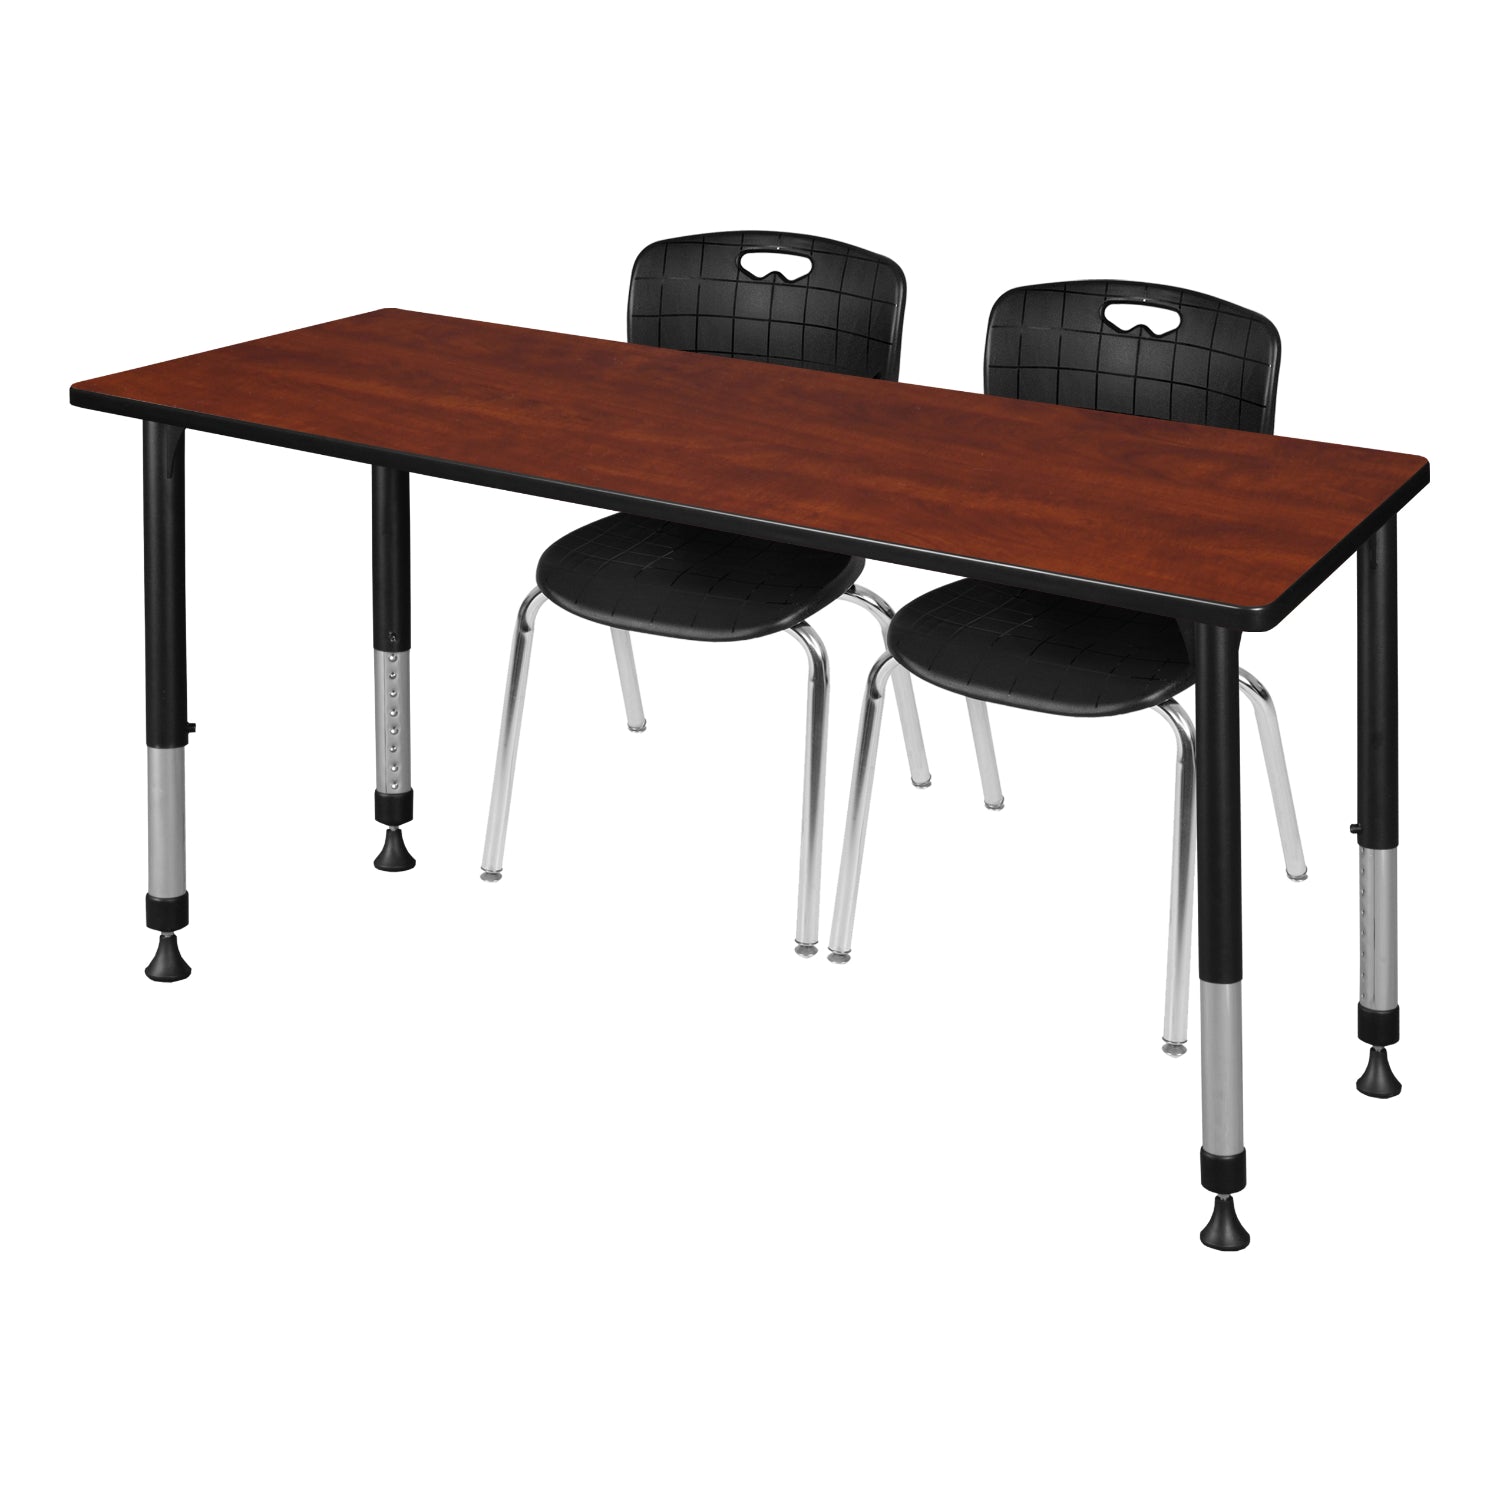 Kee Classroom Table and Chair Package, Kee 66" x 24" Rectangular Adjustable Height Table with 2 Andy 18" Stack Chairs